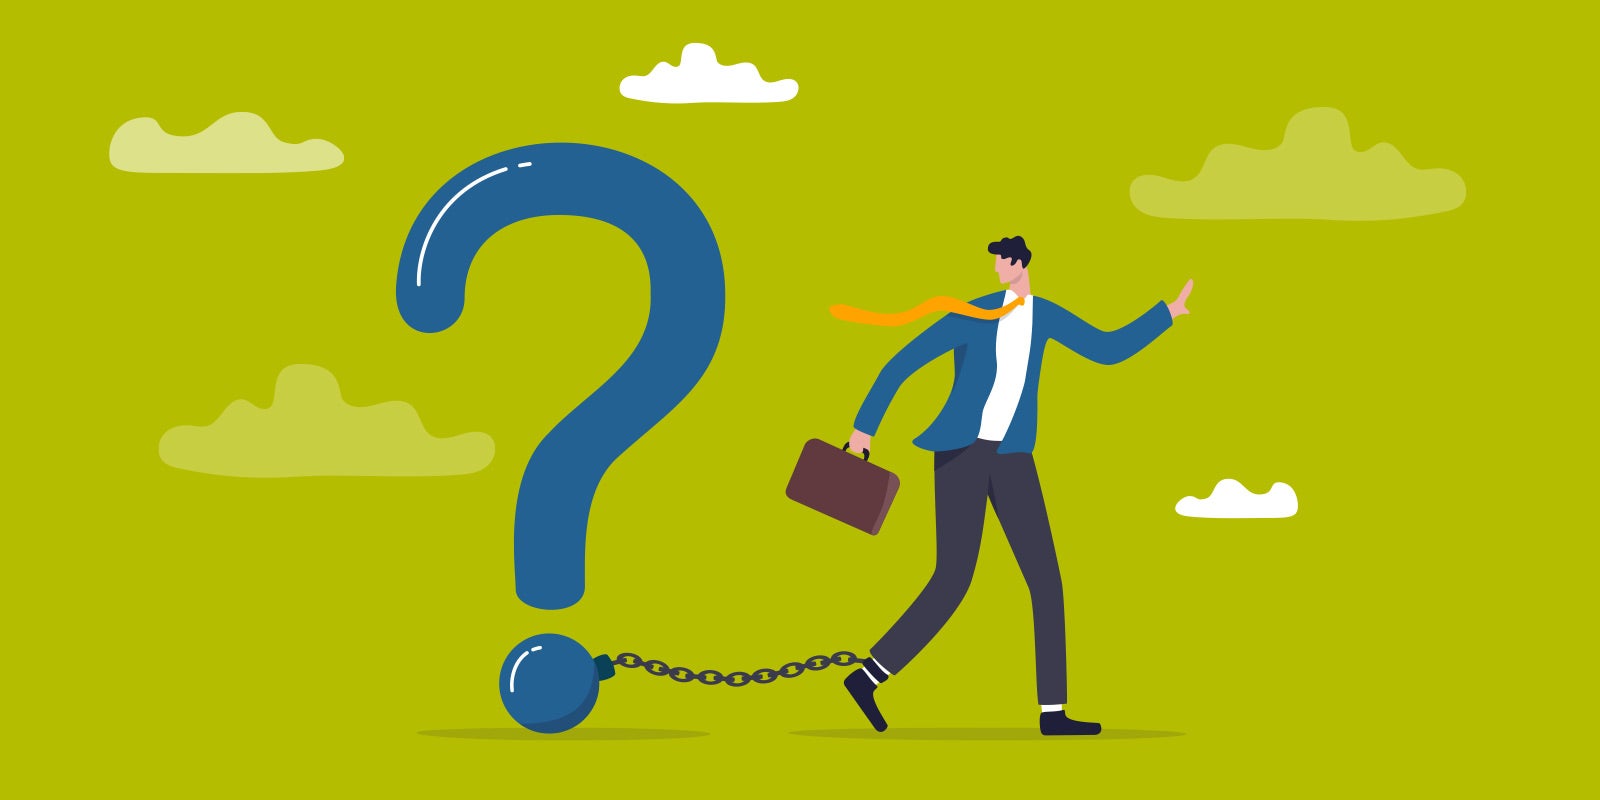 illustration of a giant question mark with a man business leader chained to the question mark to show this blog is about mistakes boards make with c-suite leadership development